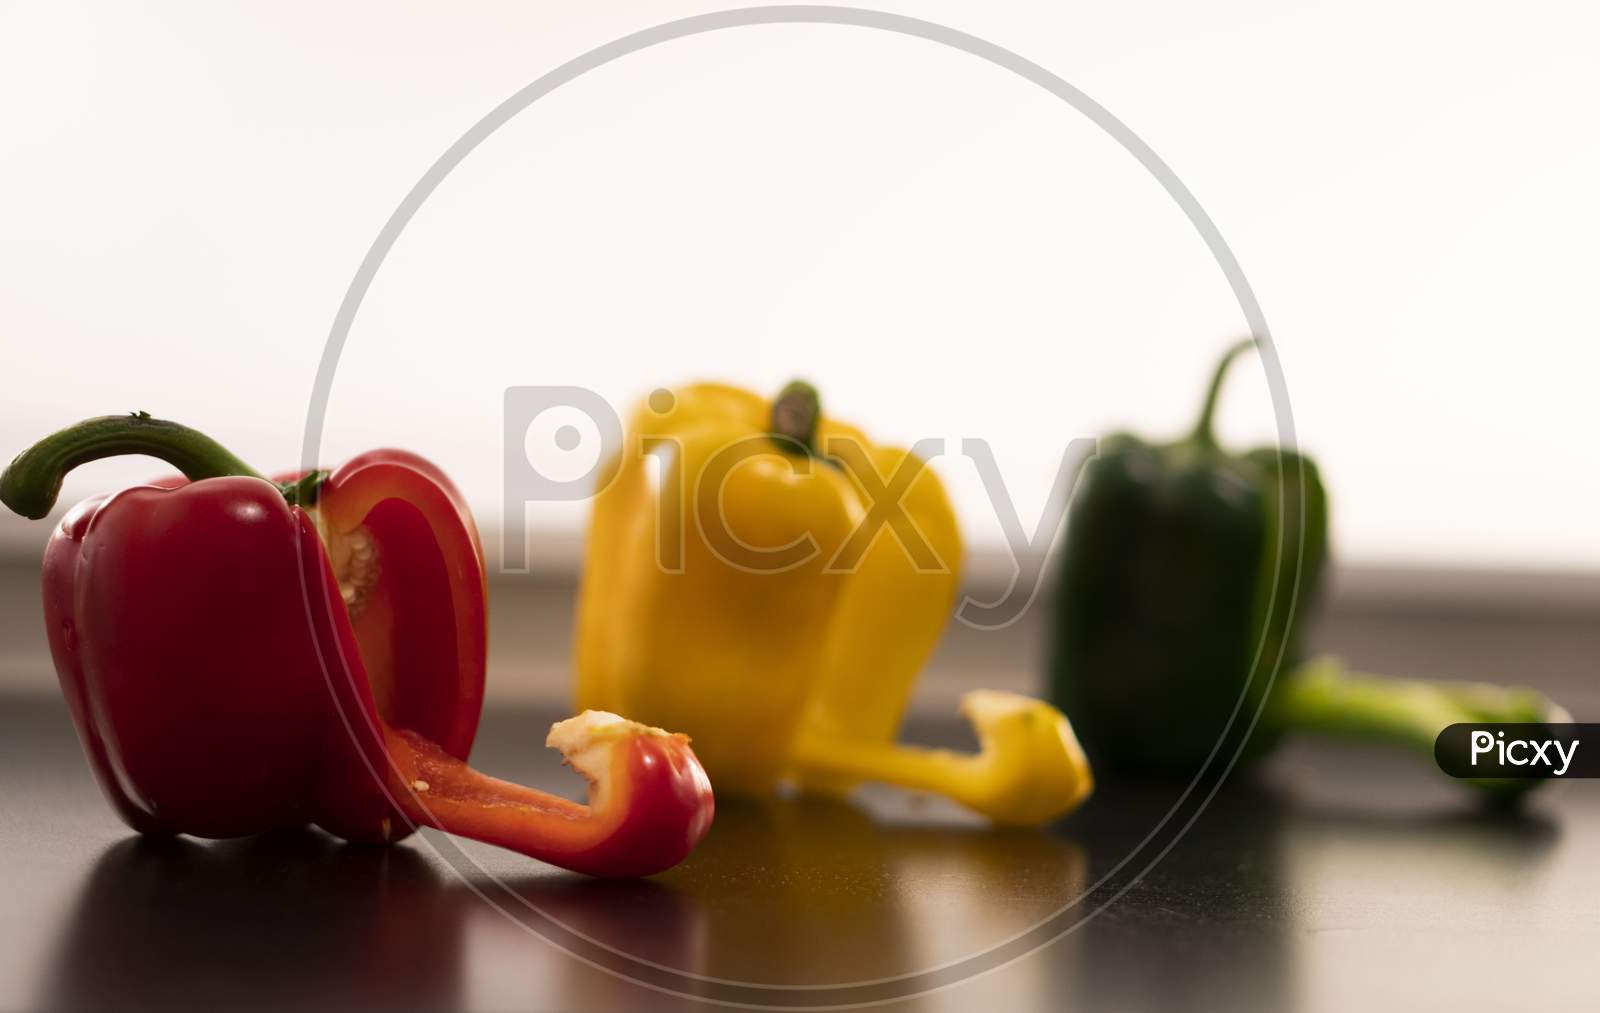 A beautiful image of the yellow, red and green bell peppers (Capsicums).